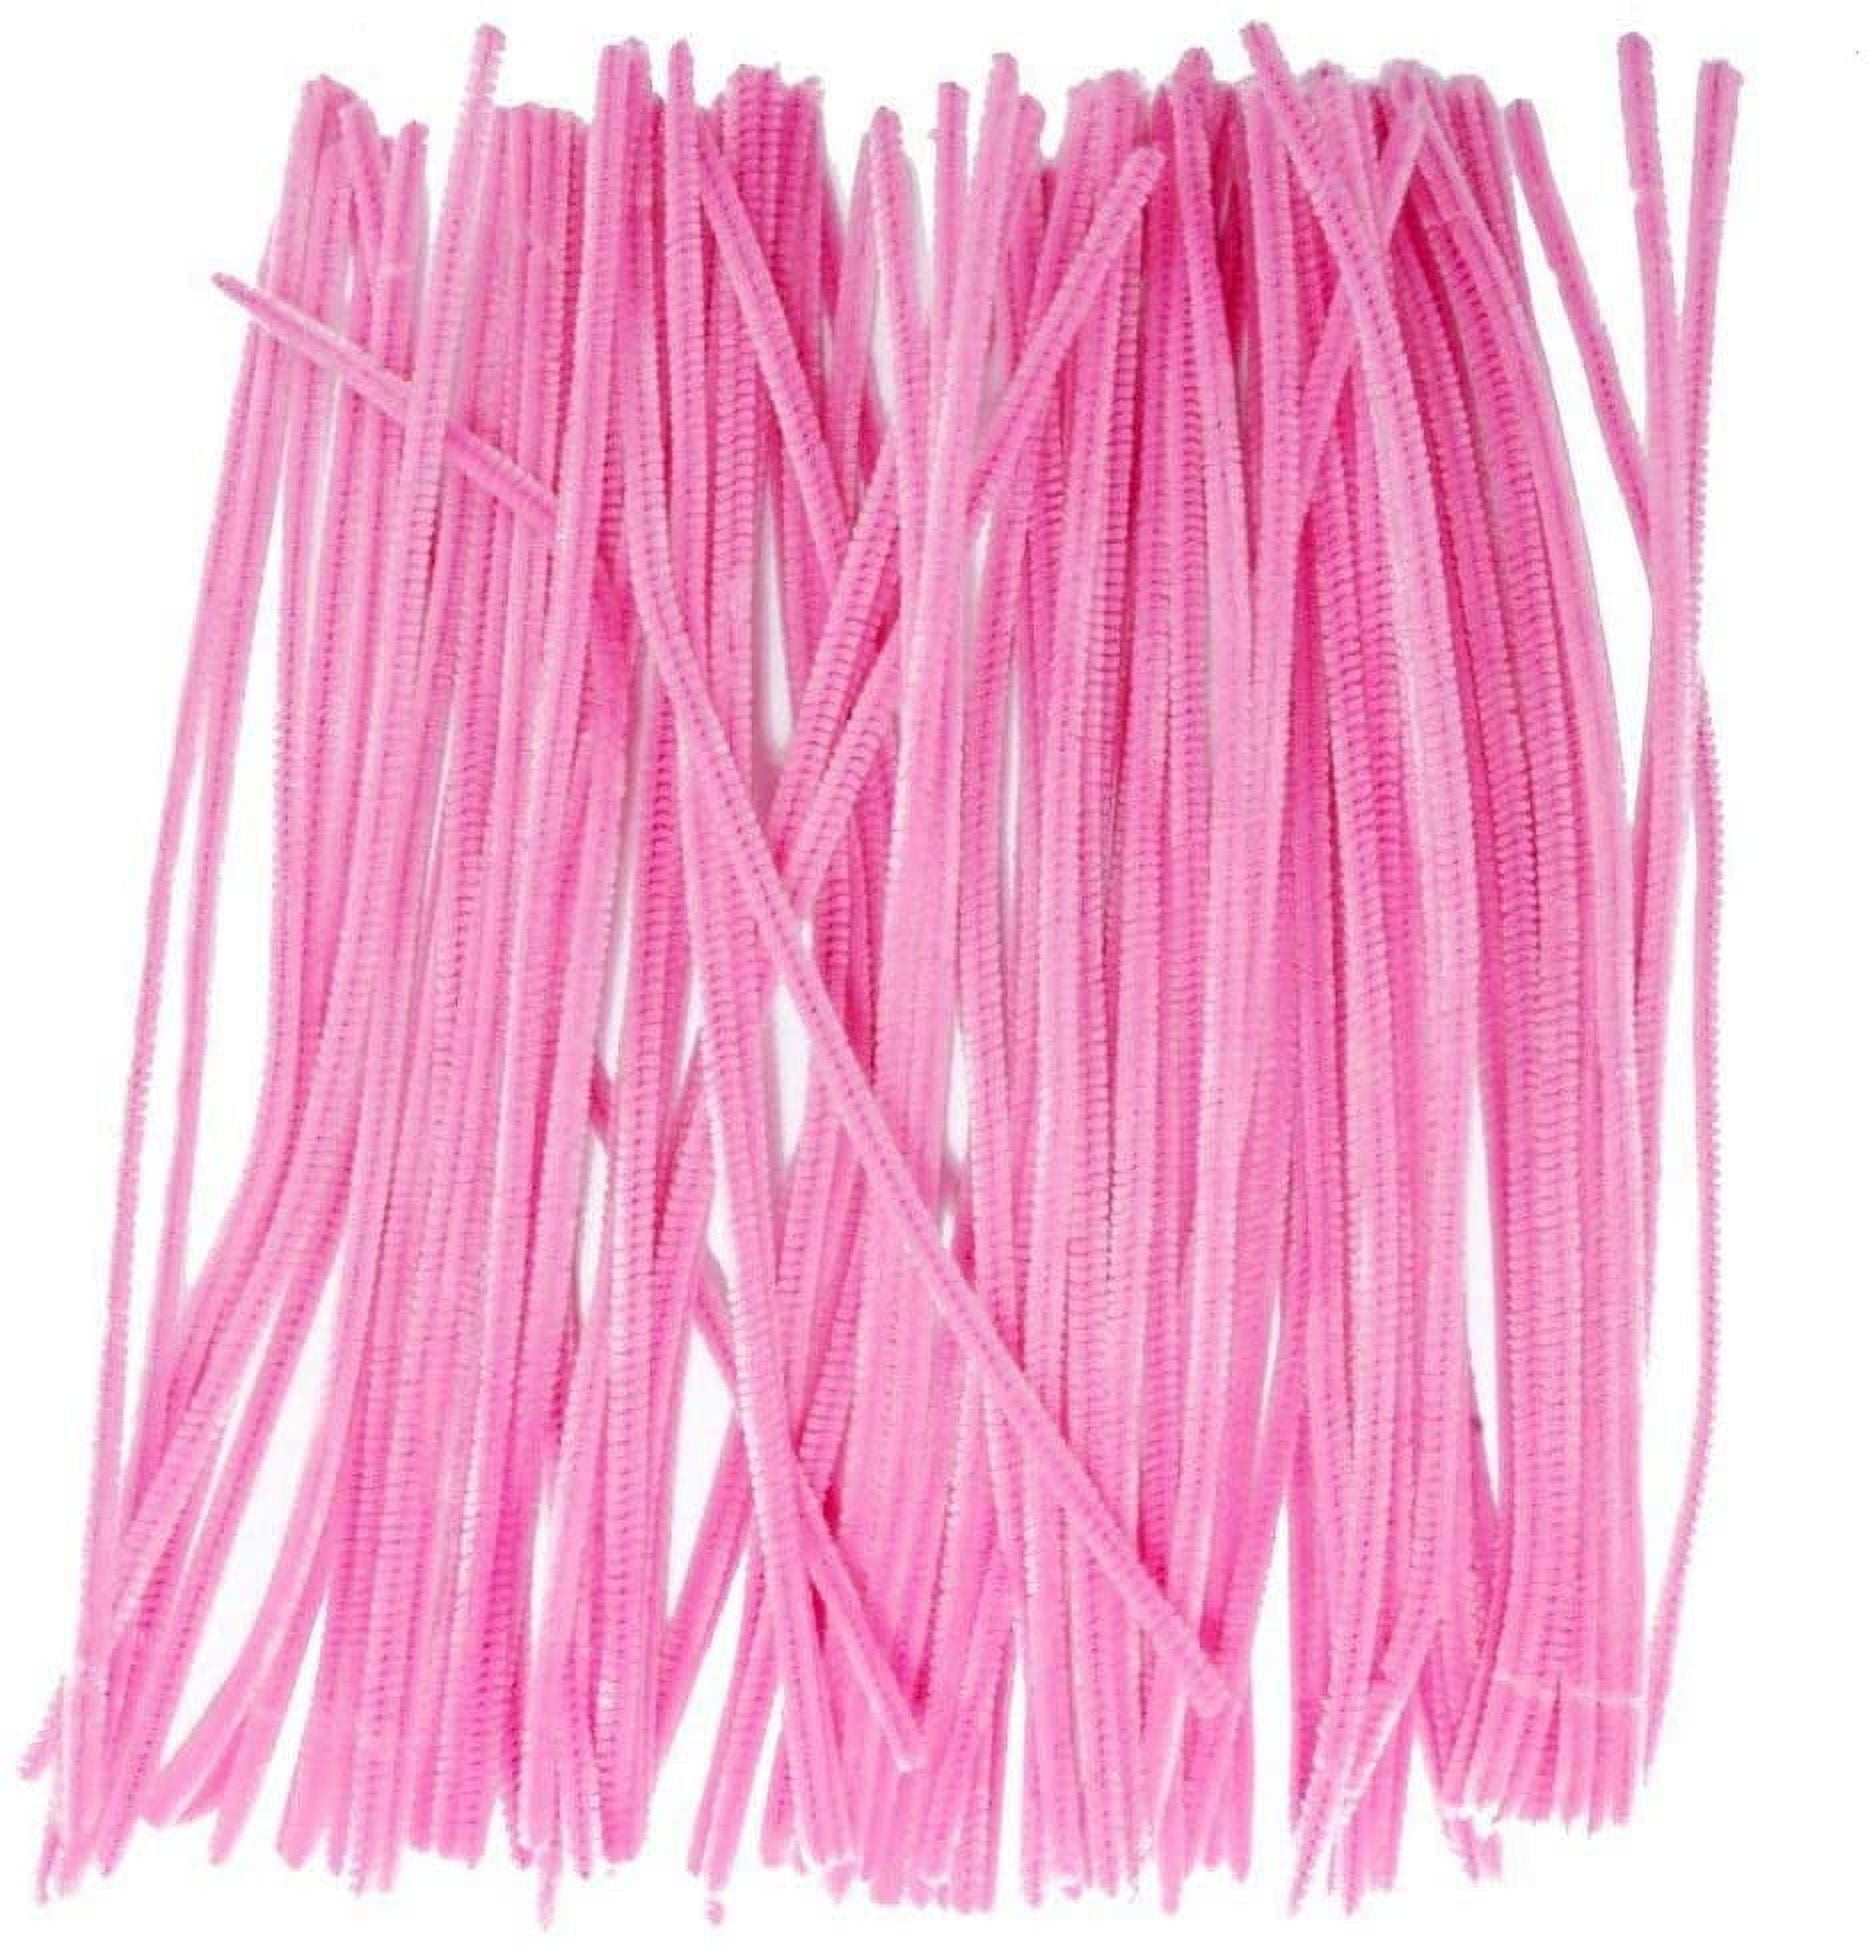 Krafty Kids Colorful Fuzzy Craft Sticks Pipe Cleaners - 40 Count - 12  Inches Long (Light Pink)